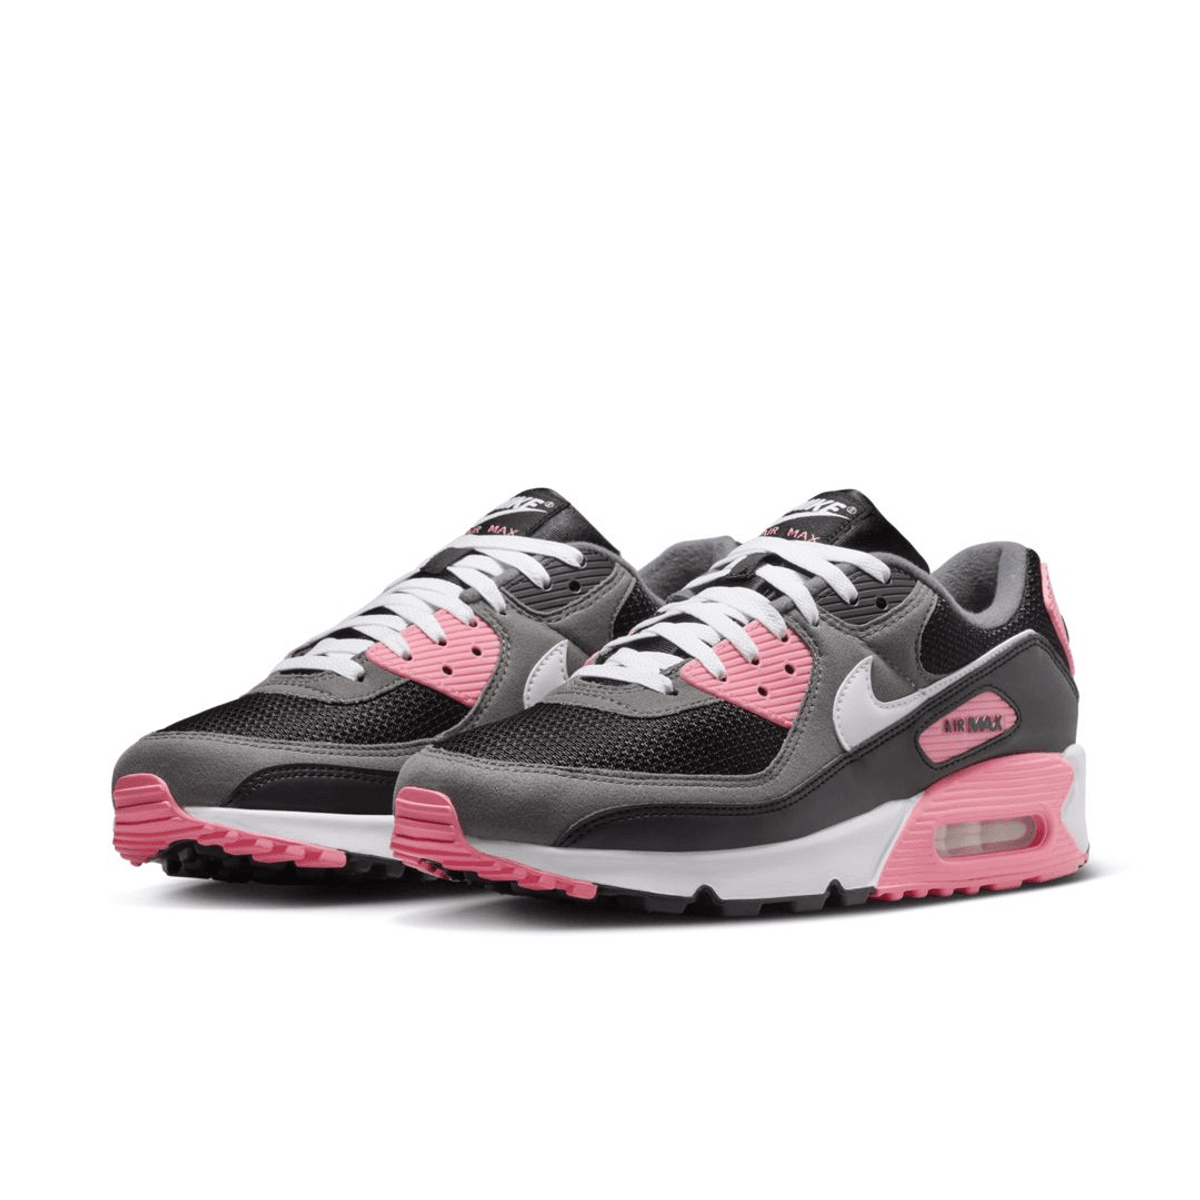 "Black Rose" Is The Newest Nike Air Max 90